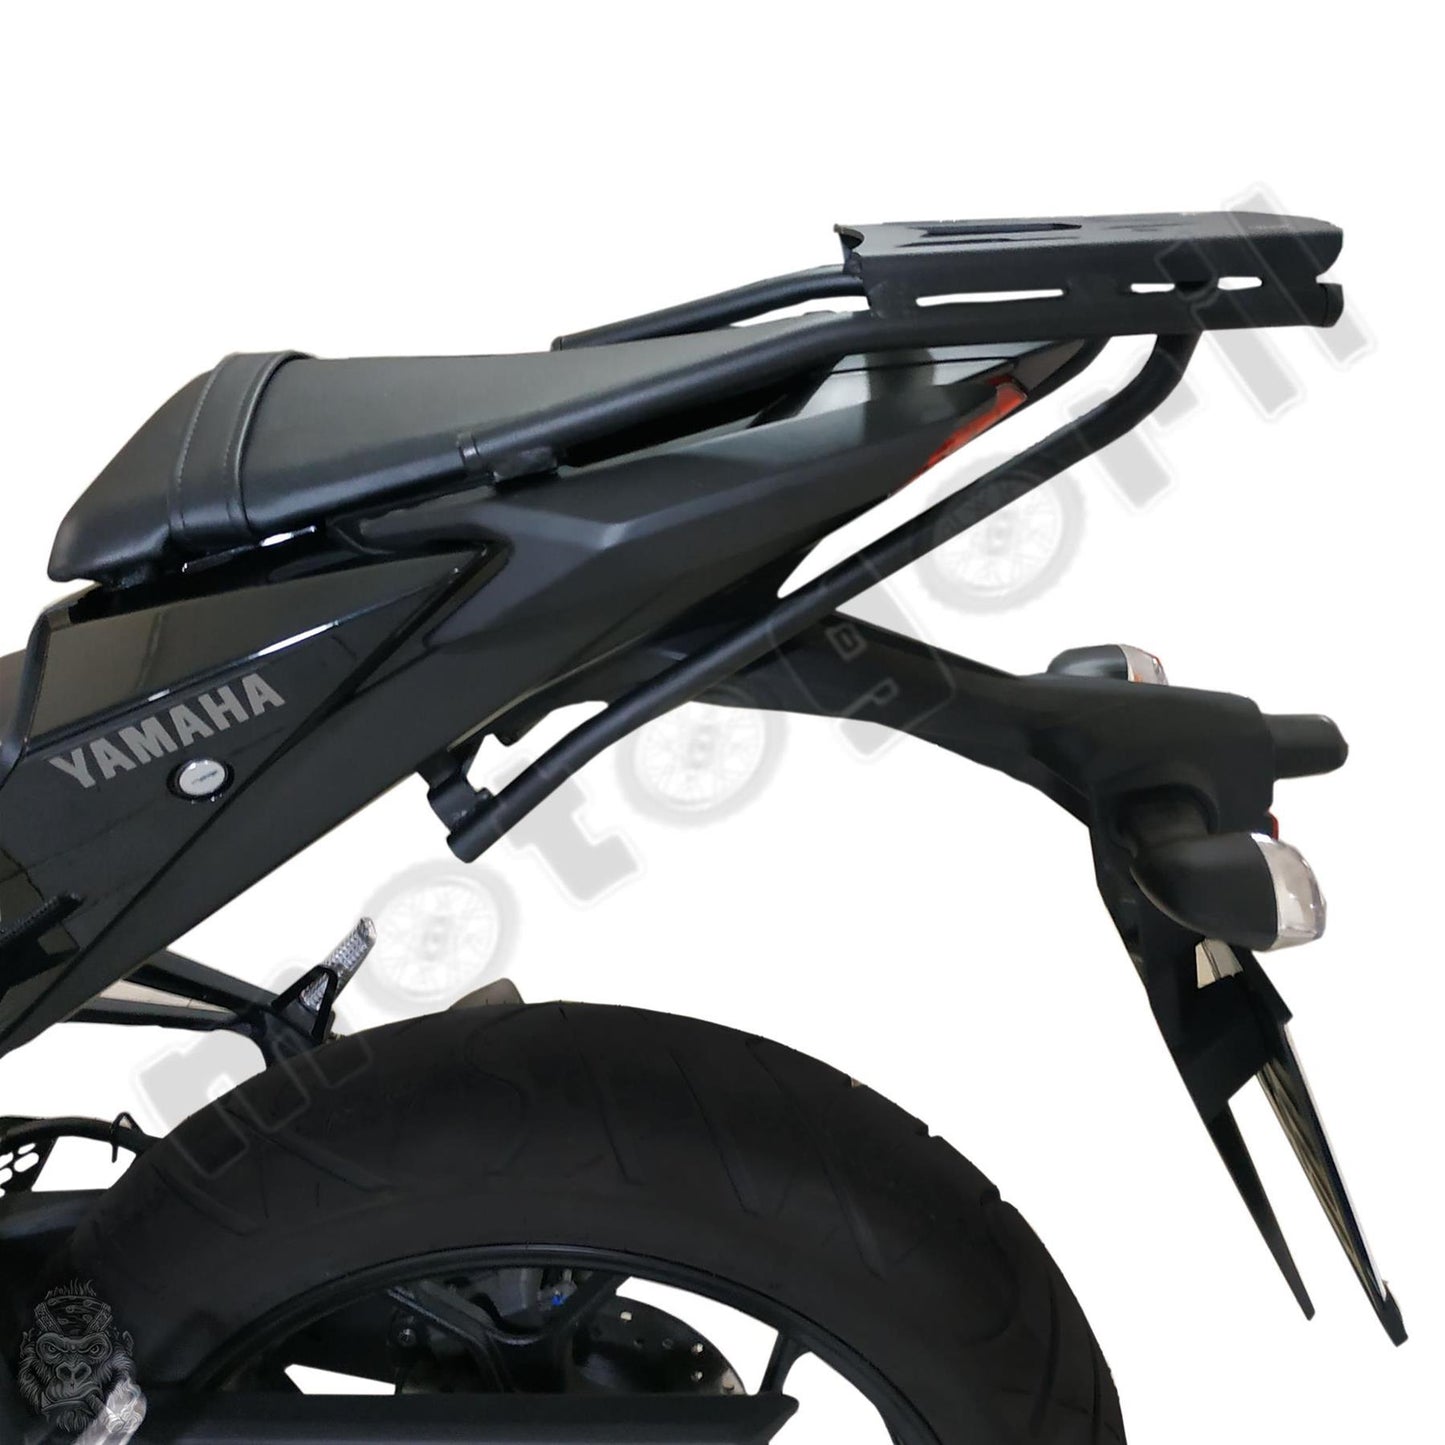 Yamaha MT03 luggage rack + 32 LT top case set 16-19 ALL IN ONE.